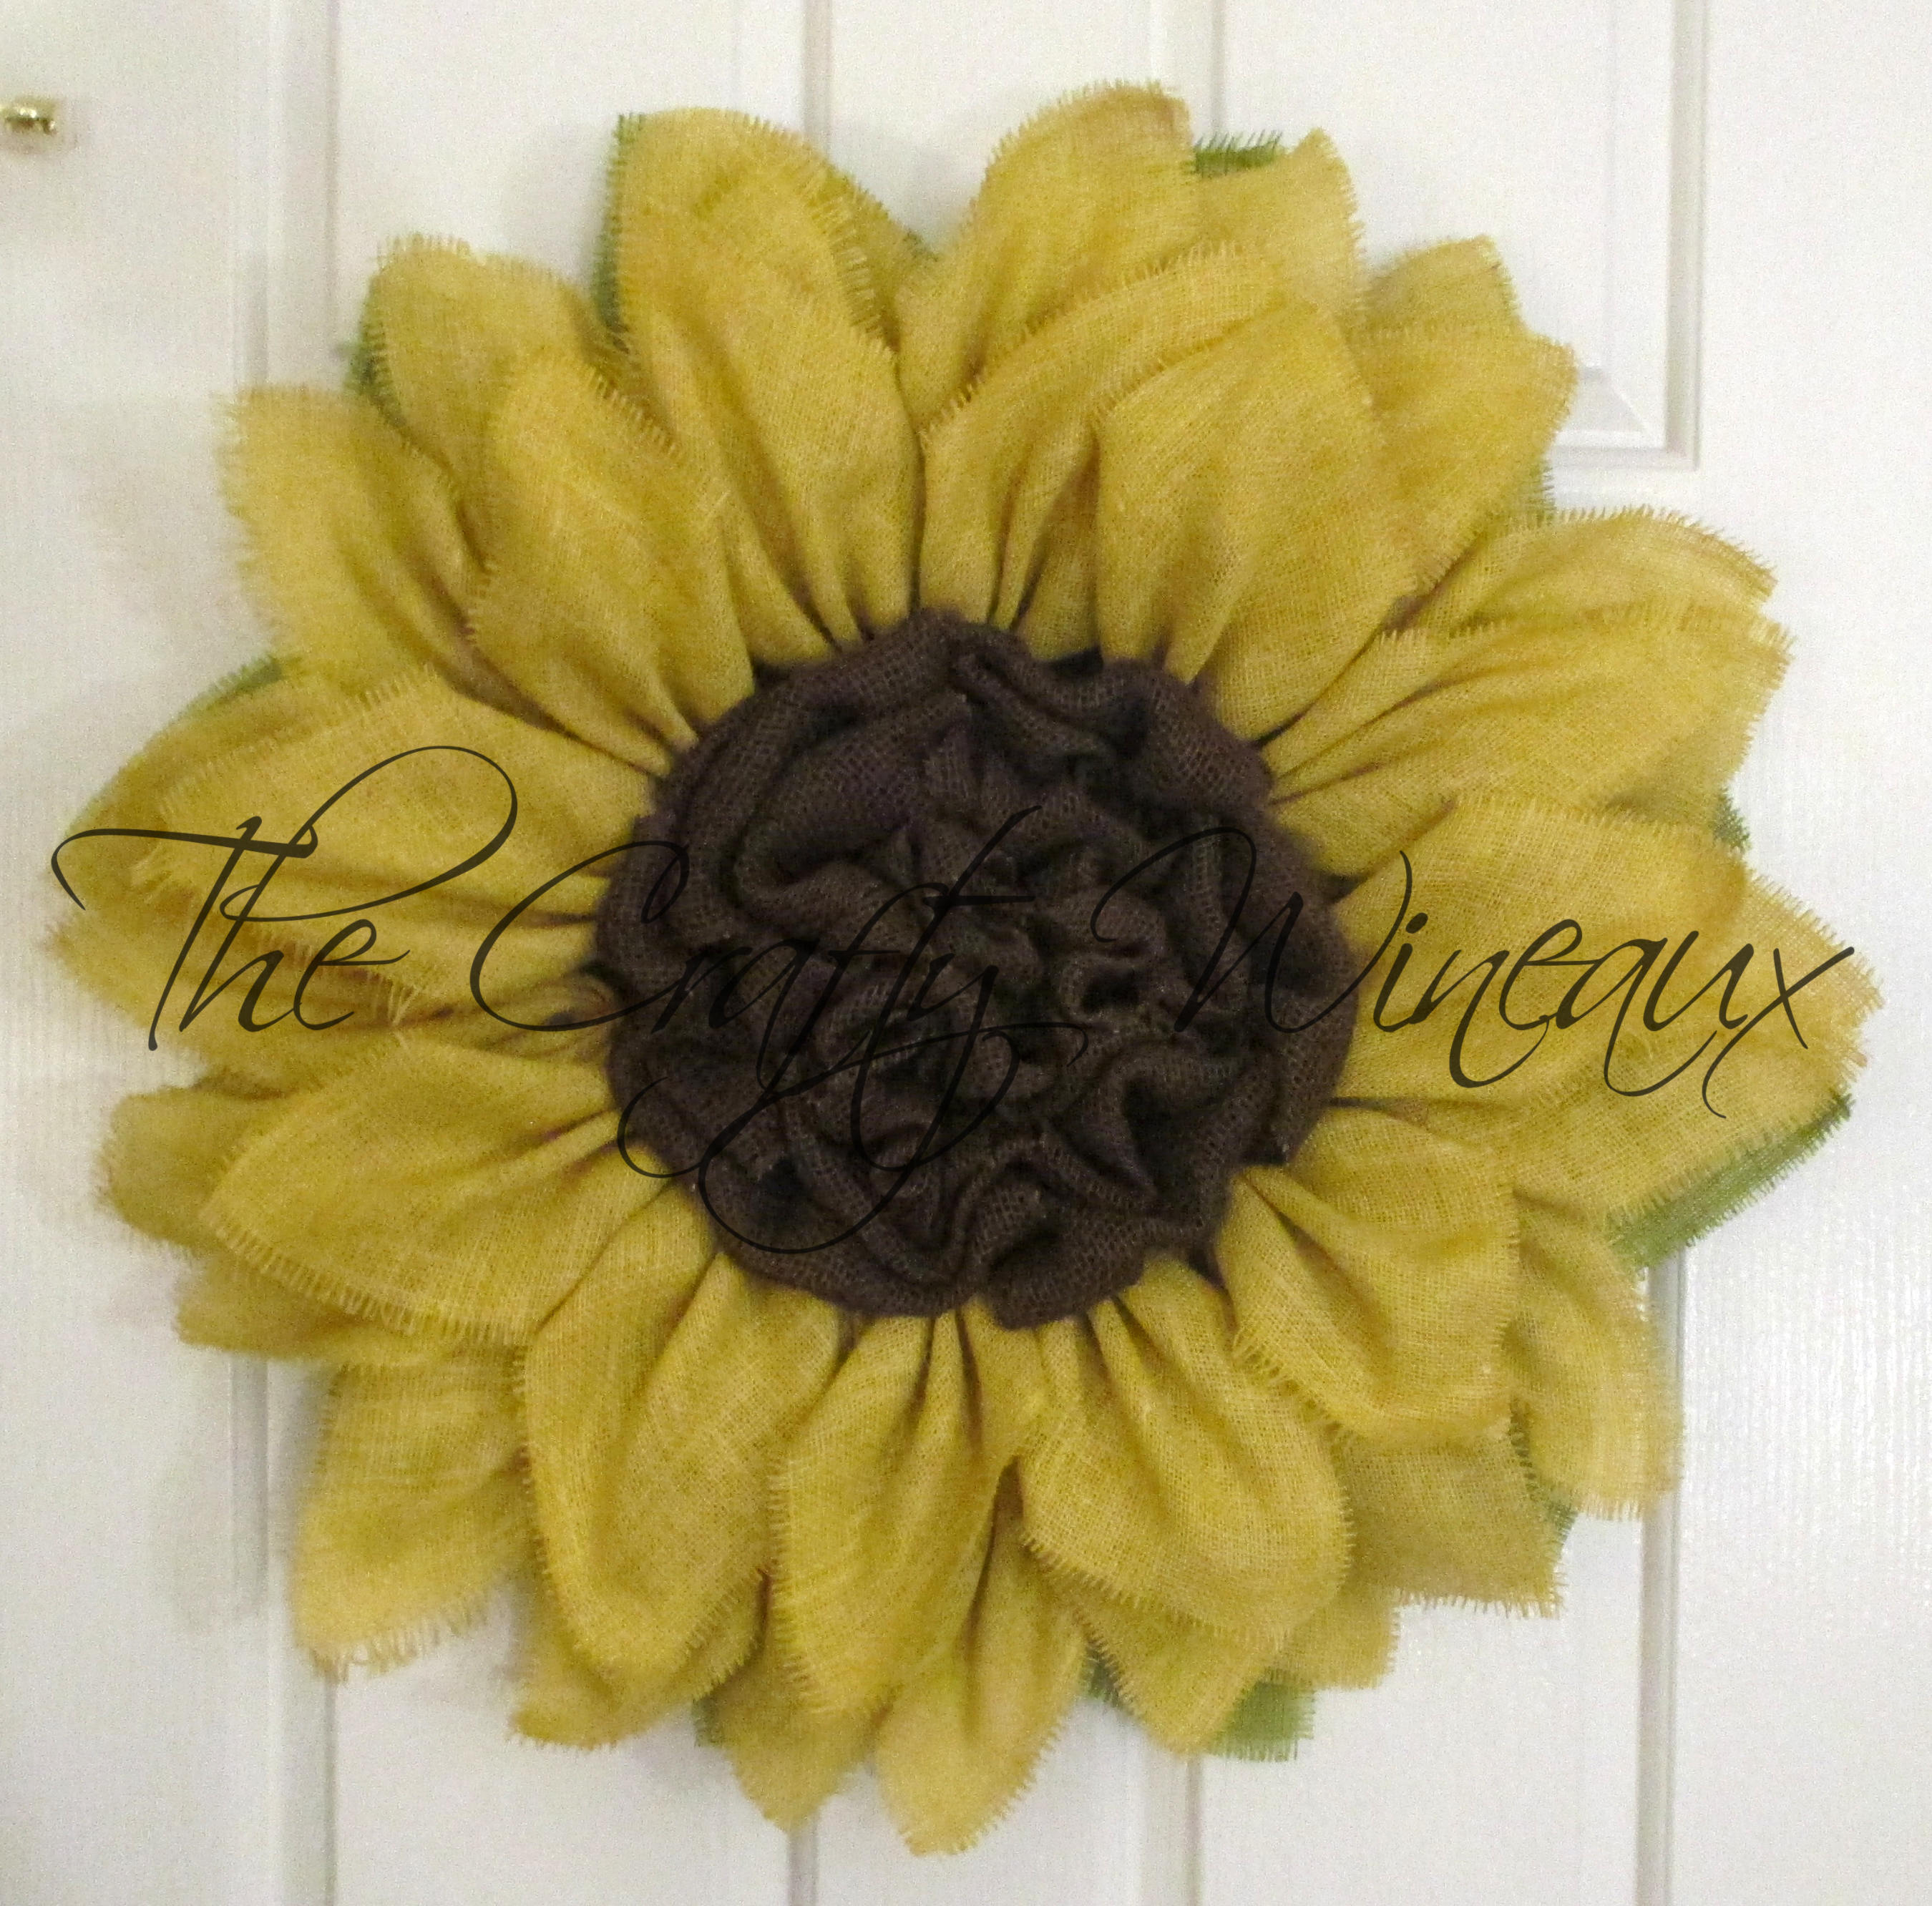 Extra Large 30 Bright Yellow Burlap Sunflower Wreath by The Crafty Wineaux™ 